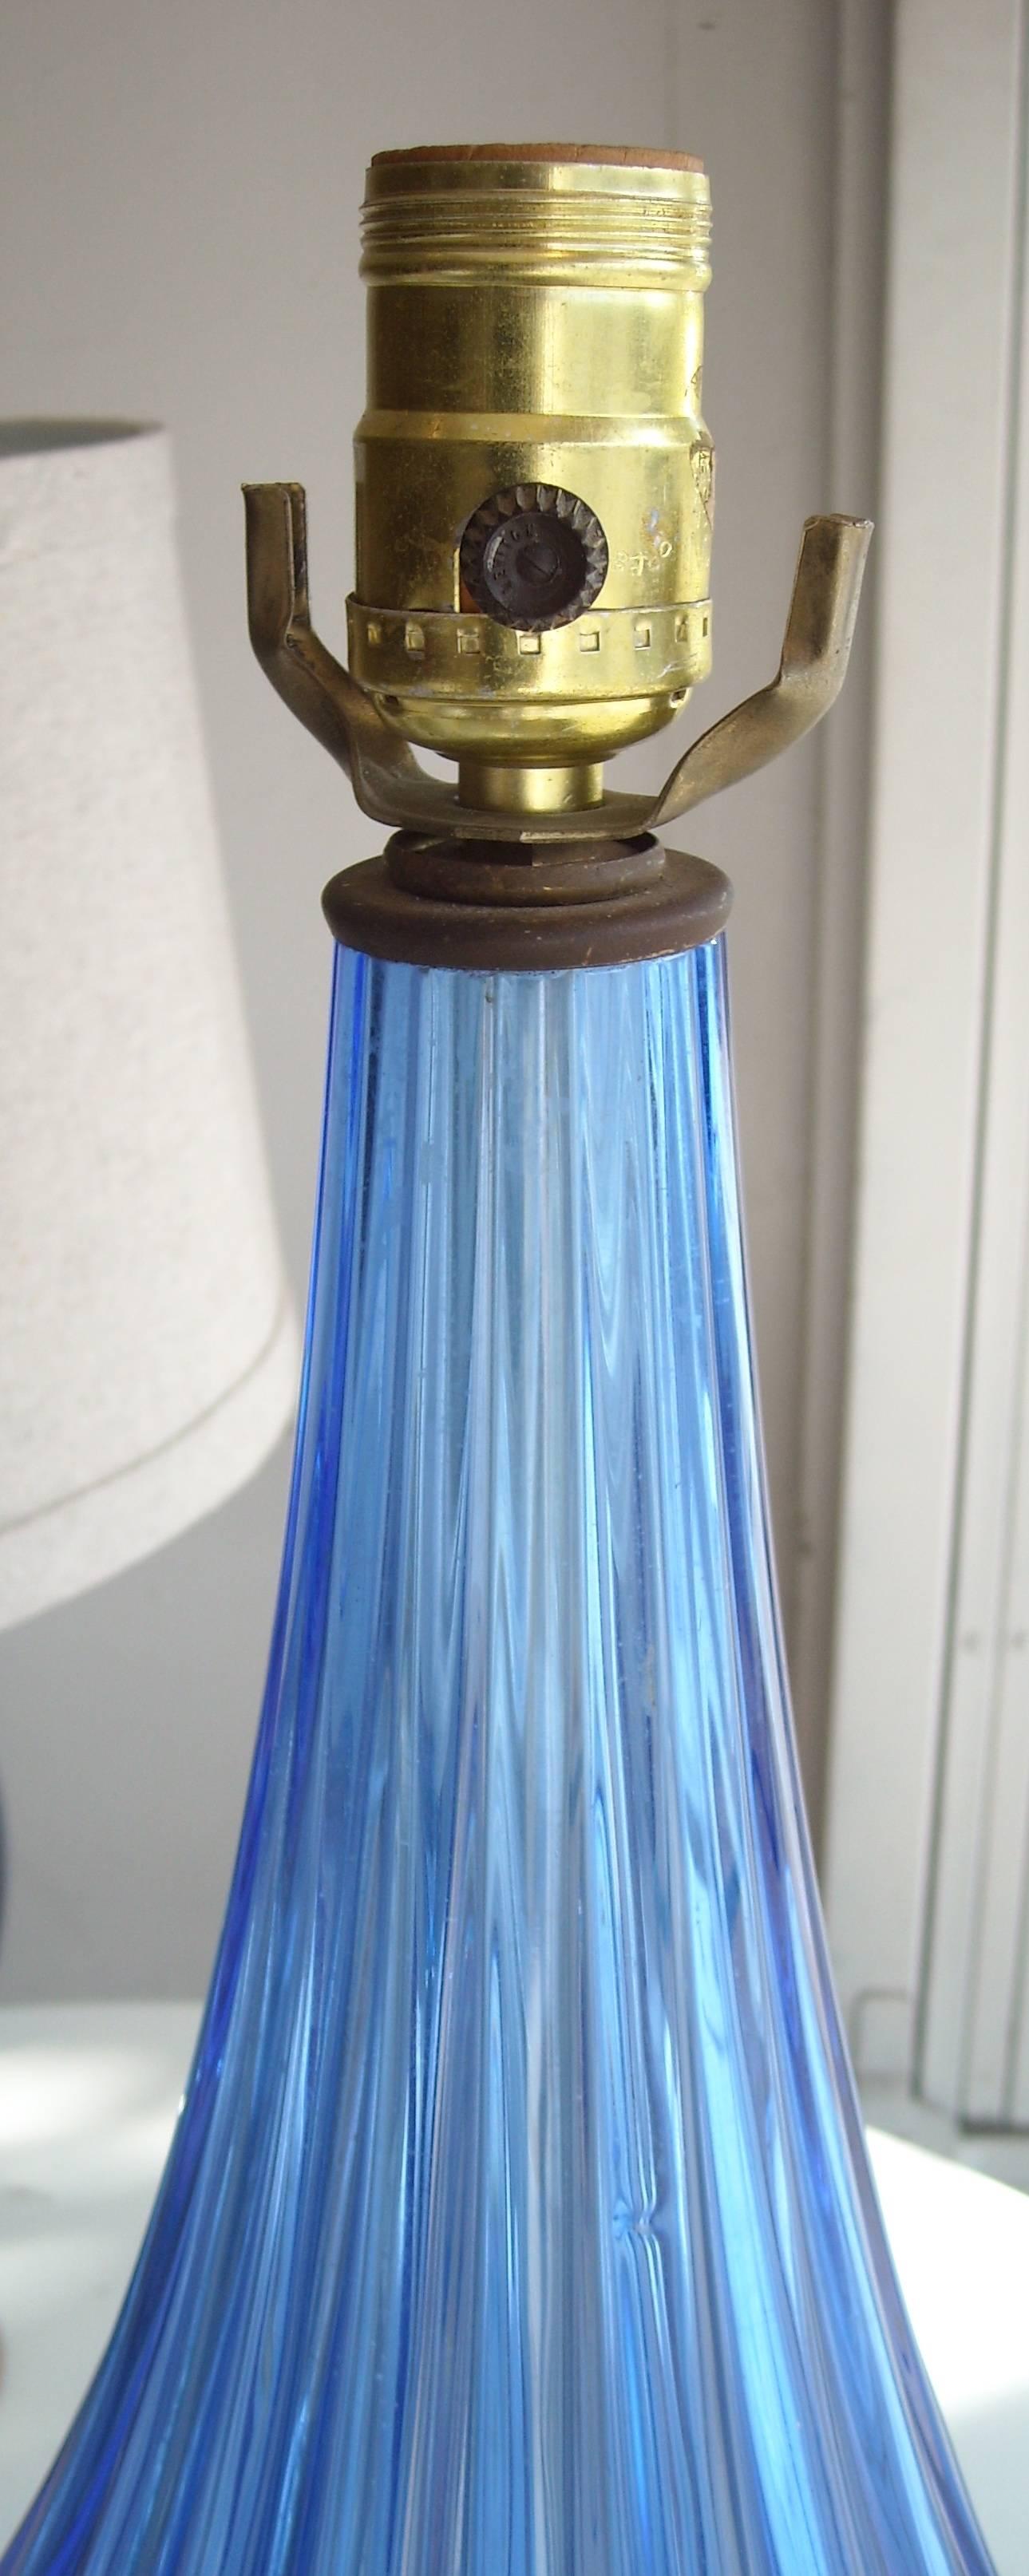 Just an amazing color and size in this blue Murano table lamp. All parts original, wire and gilded base, working.